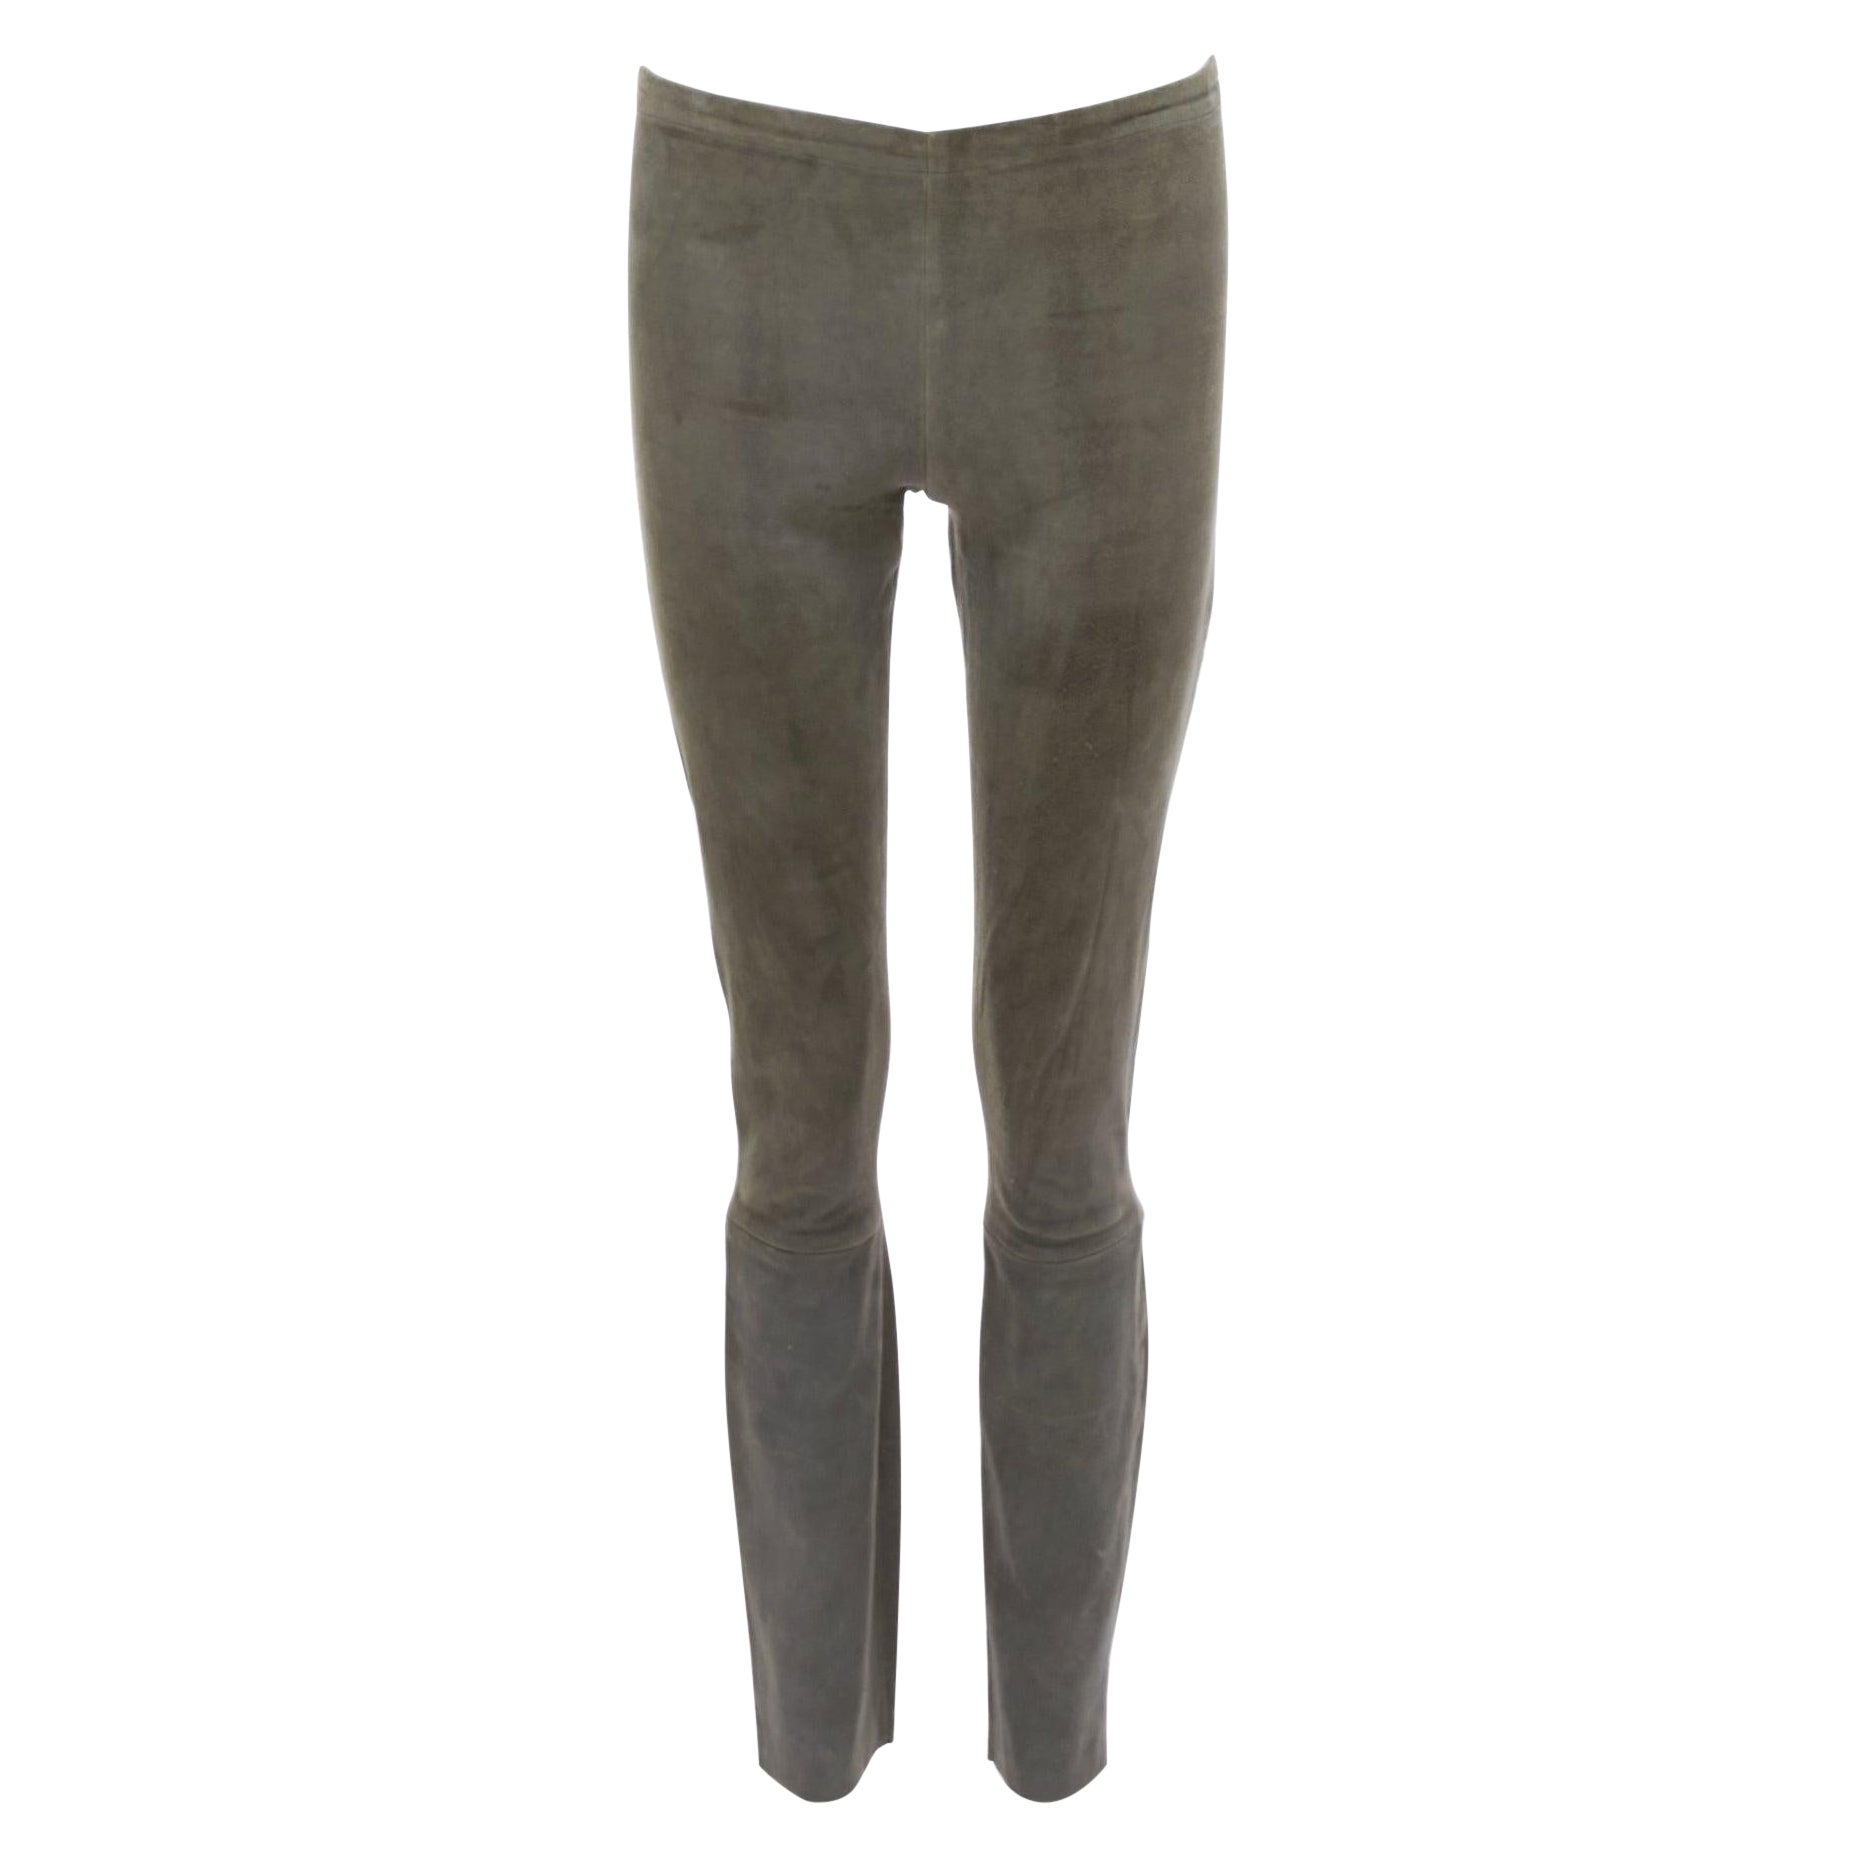 HAIDER ACKERMANN green grey suede leather flared legging pants FR36 S For Sale